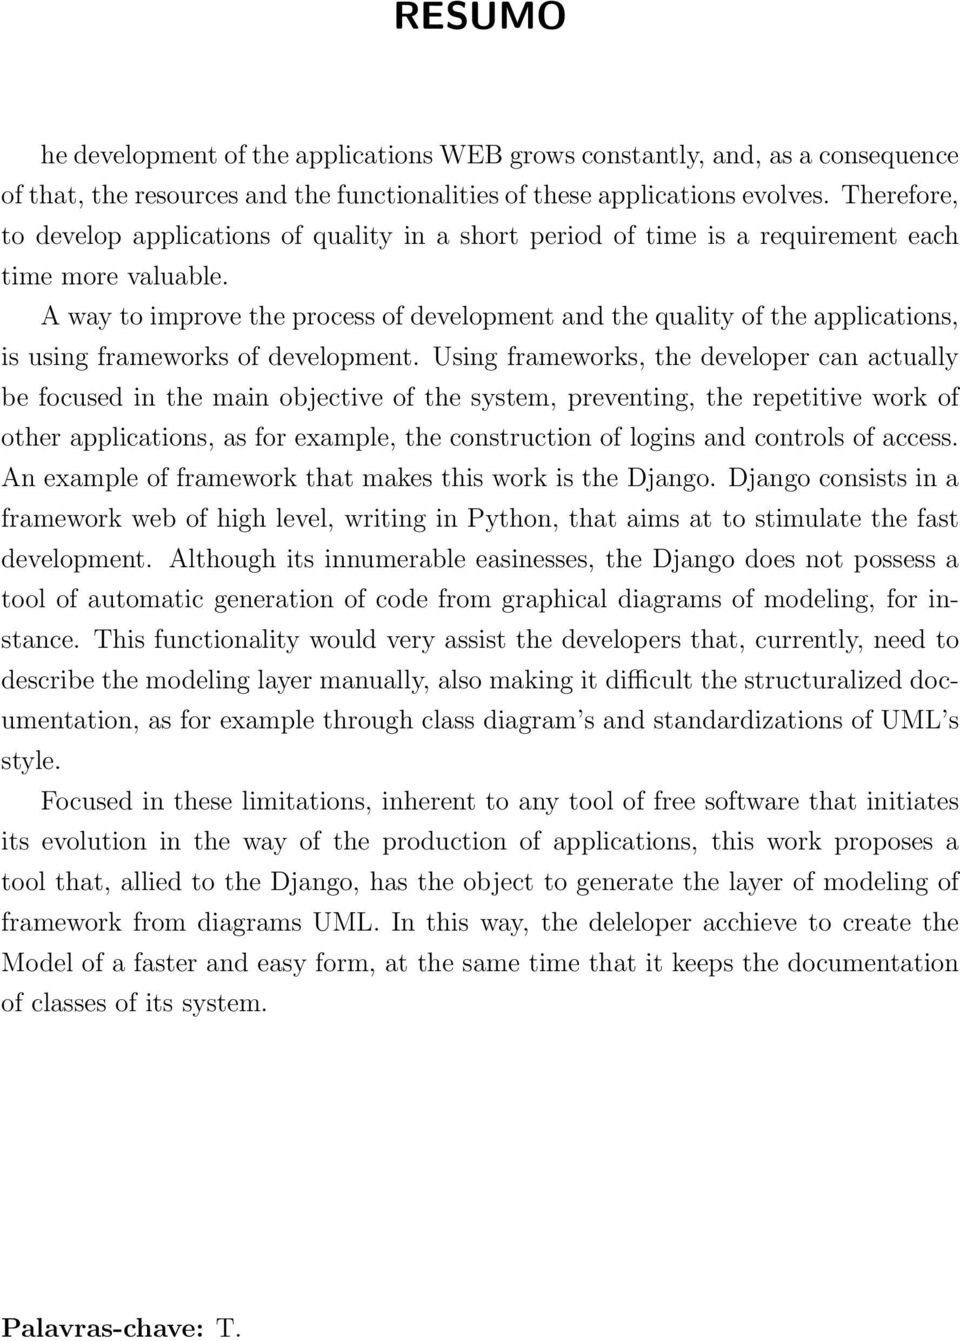 A way to improve the process of development and the quality of the applications, is using frameworks of development.